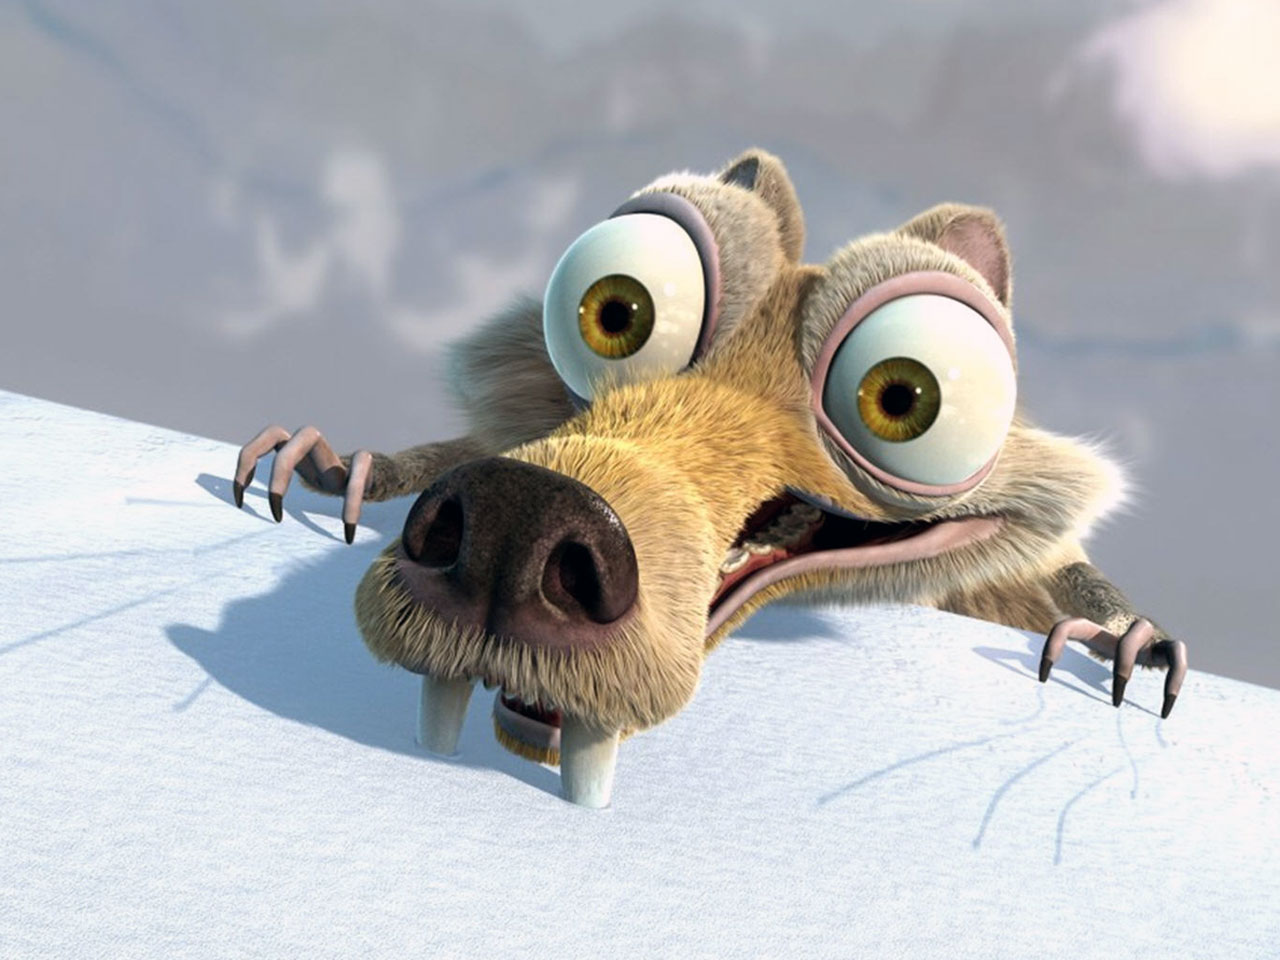 Previous, Cartoons - Ice Age 3 Dawn of the Dinosaurs wallpaper